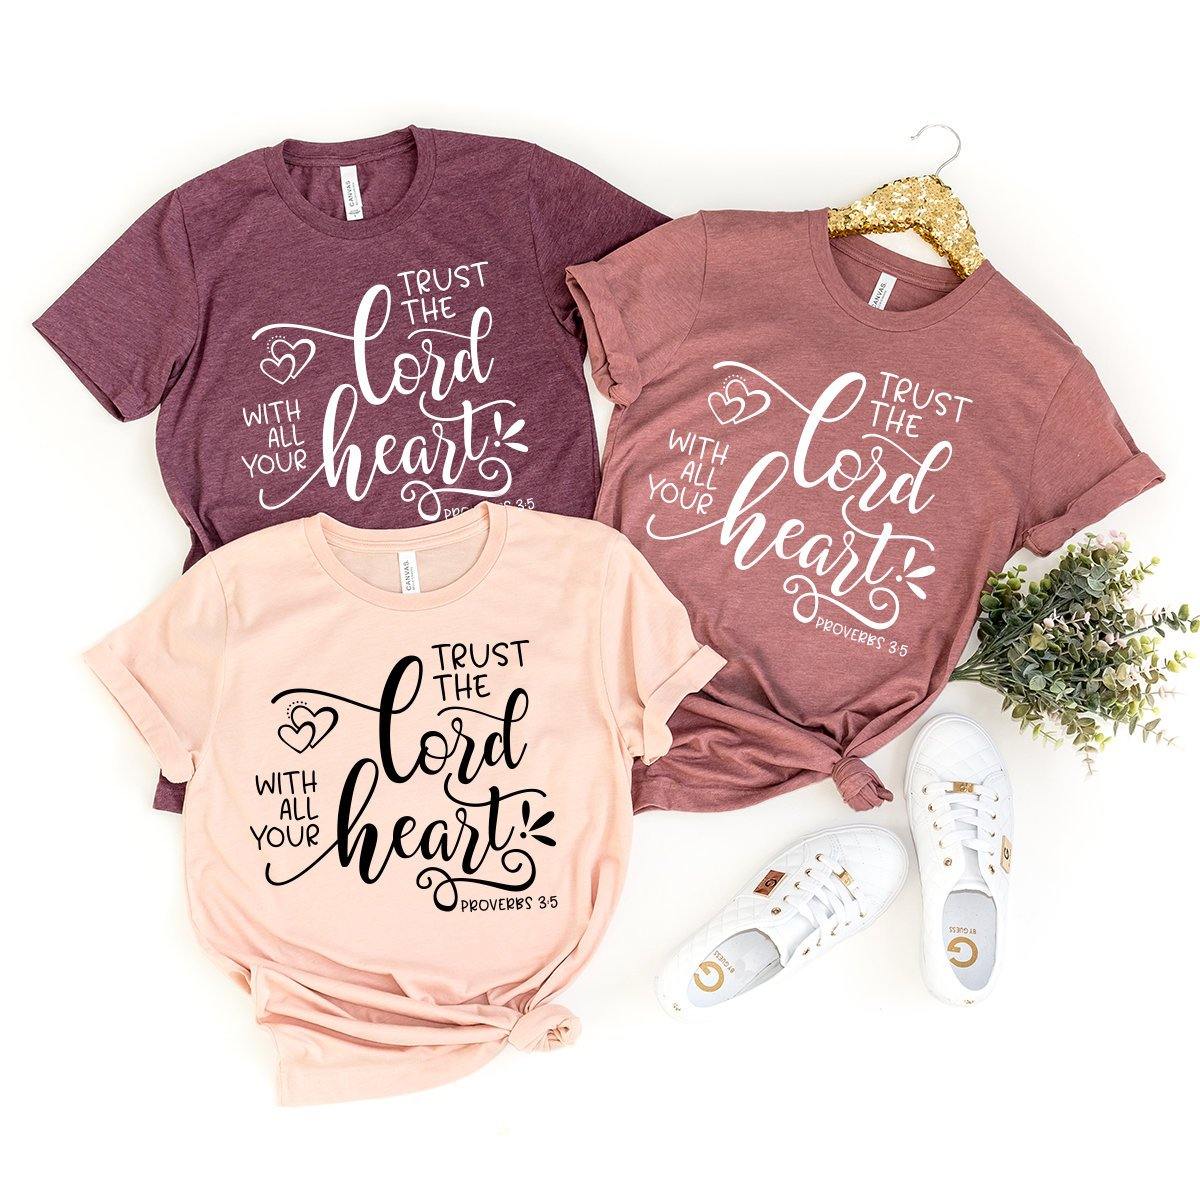 Christian T-Shirt, Proverbs 3 5 Shirt, Bible Verse Quote Tee, Church Shirt, Jesus Christ Shirt, Trust The Lord With All Your Heart Shirt - Fastdeliverytees.com